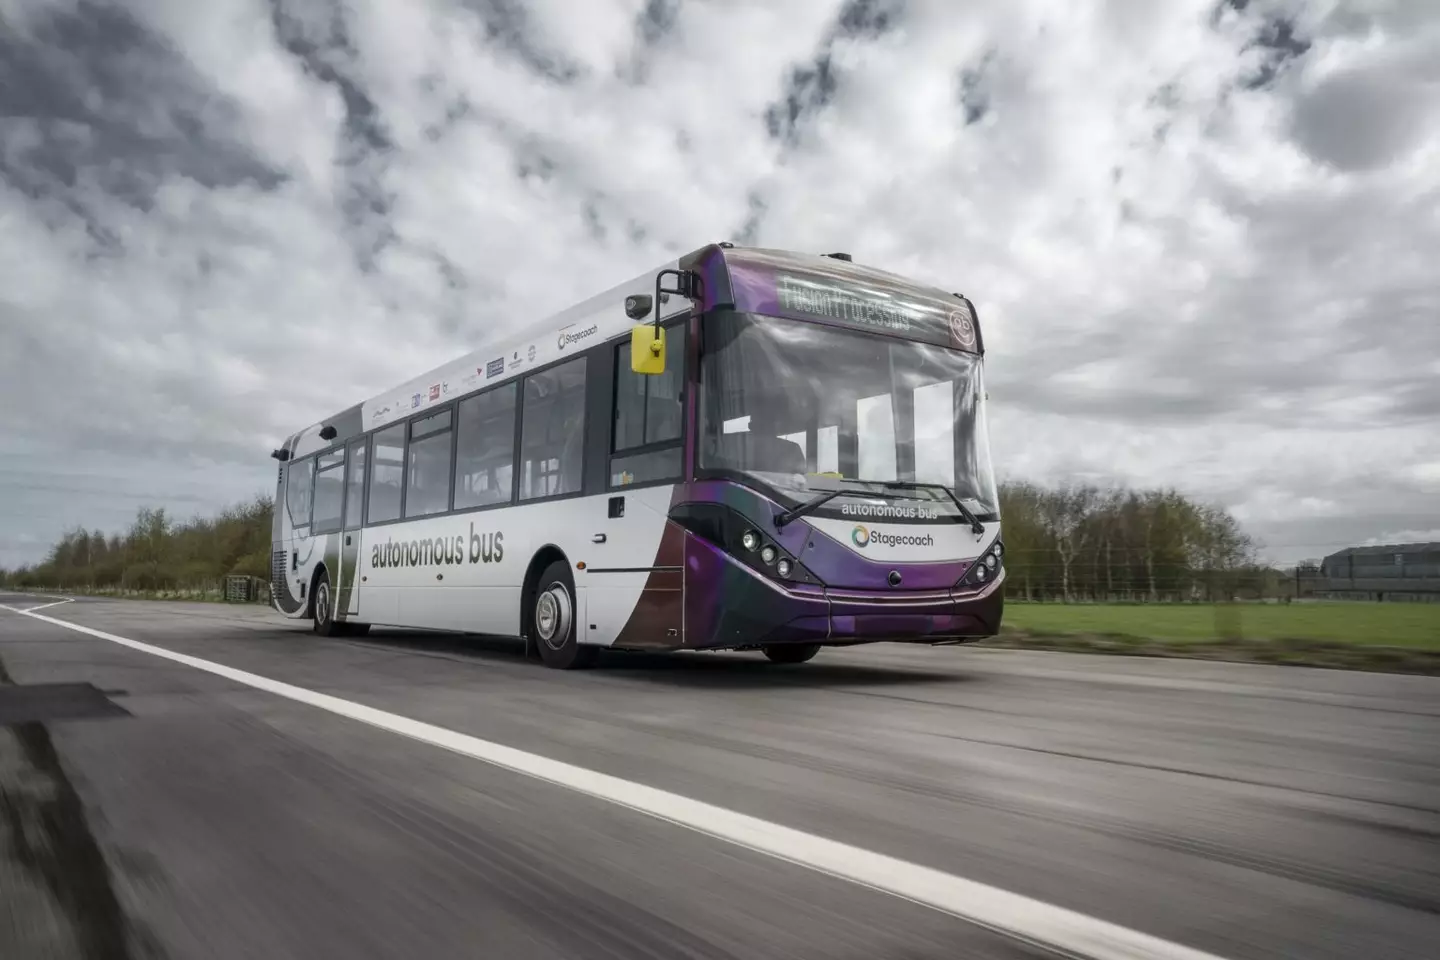 Five of the driverless buses are being tested.